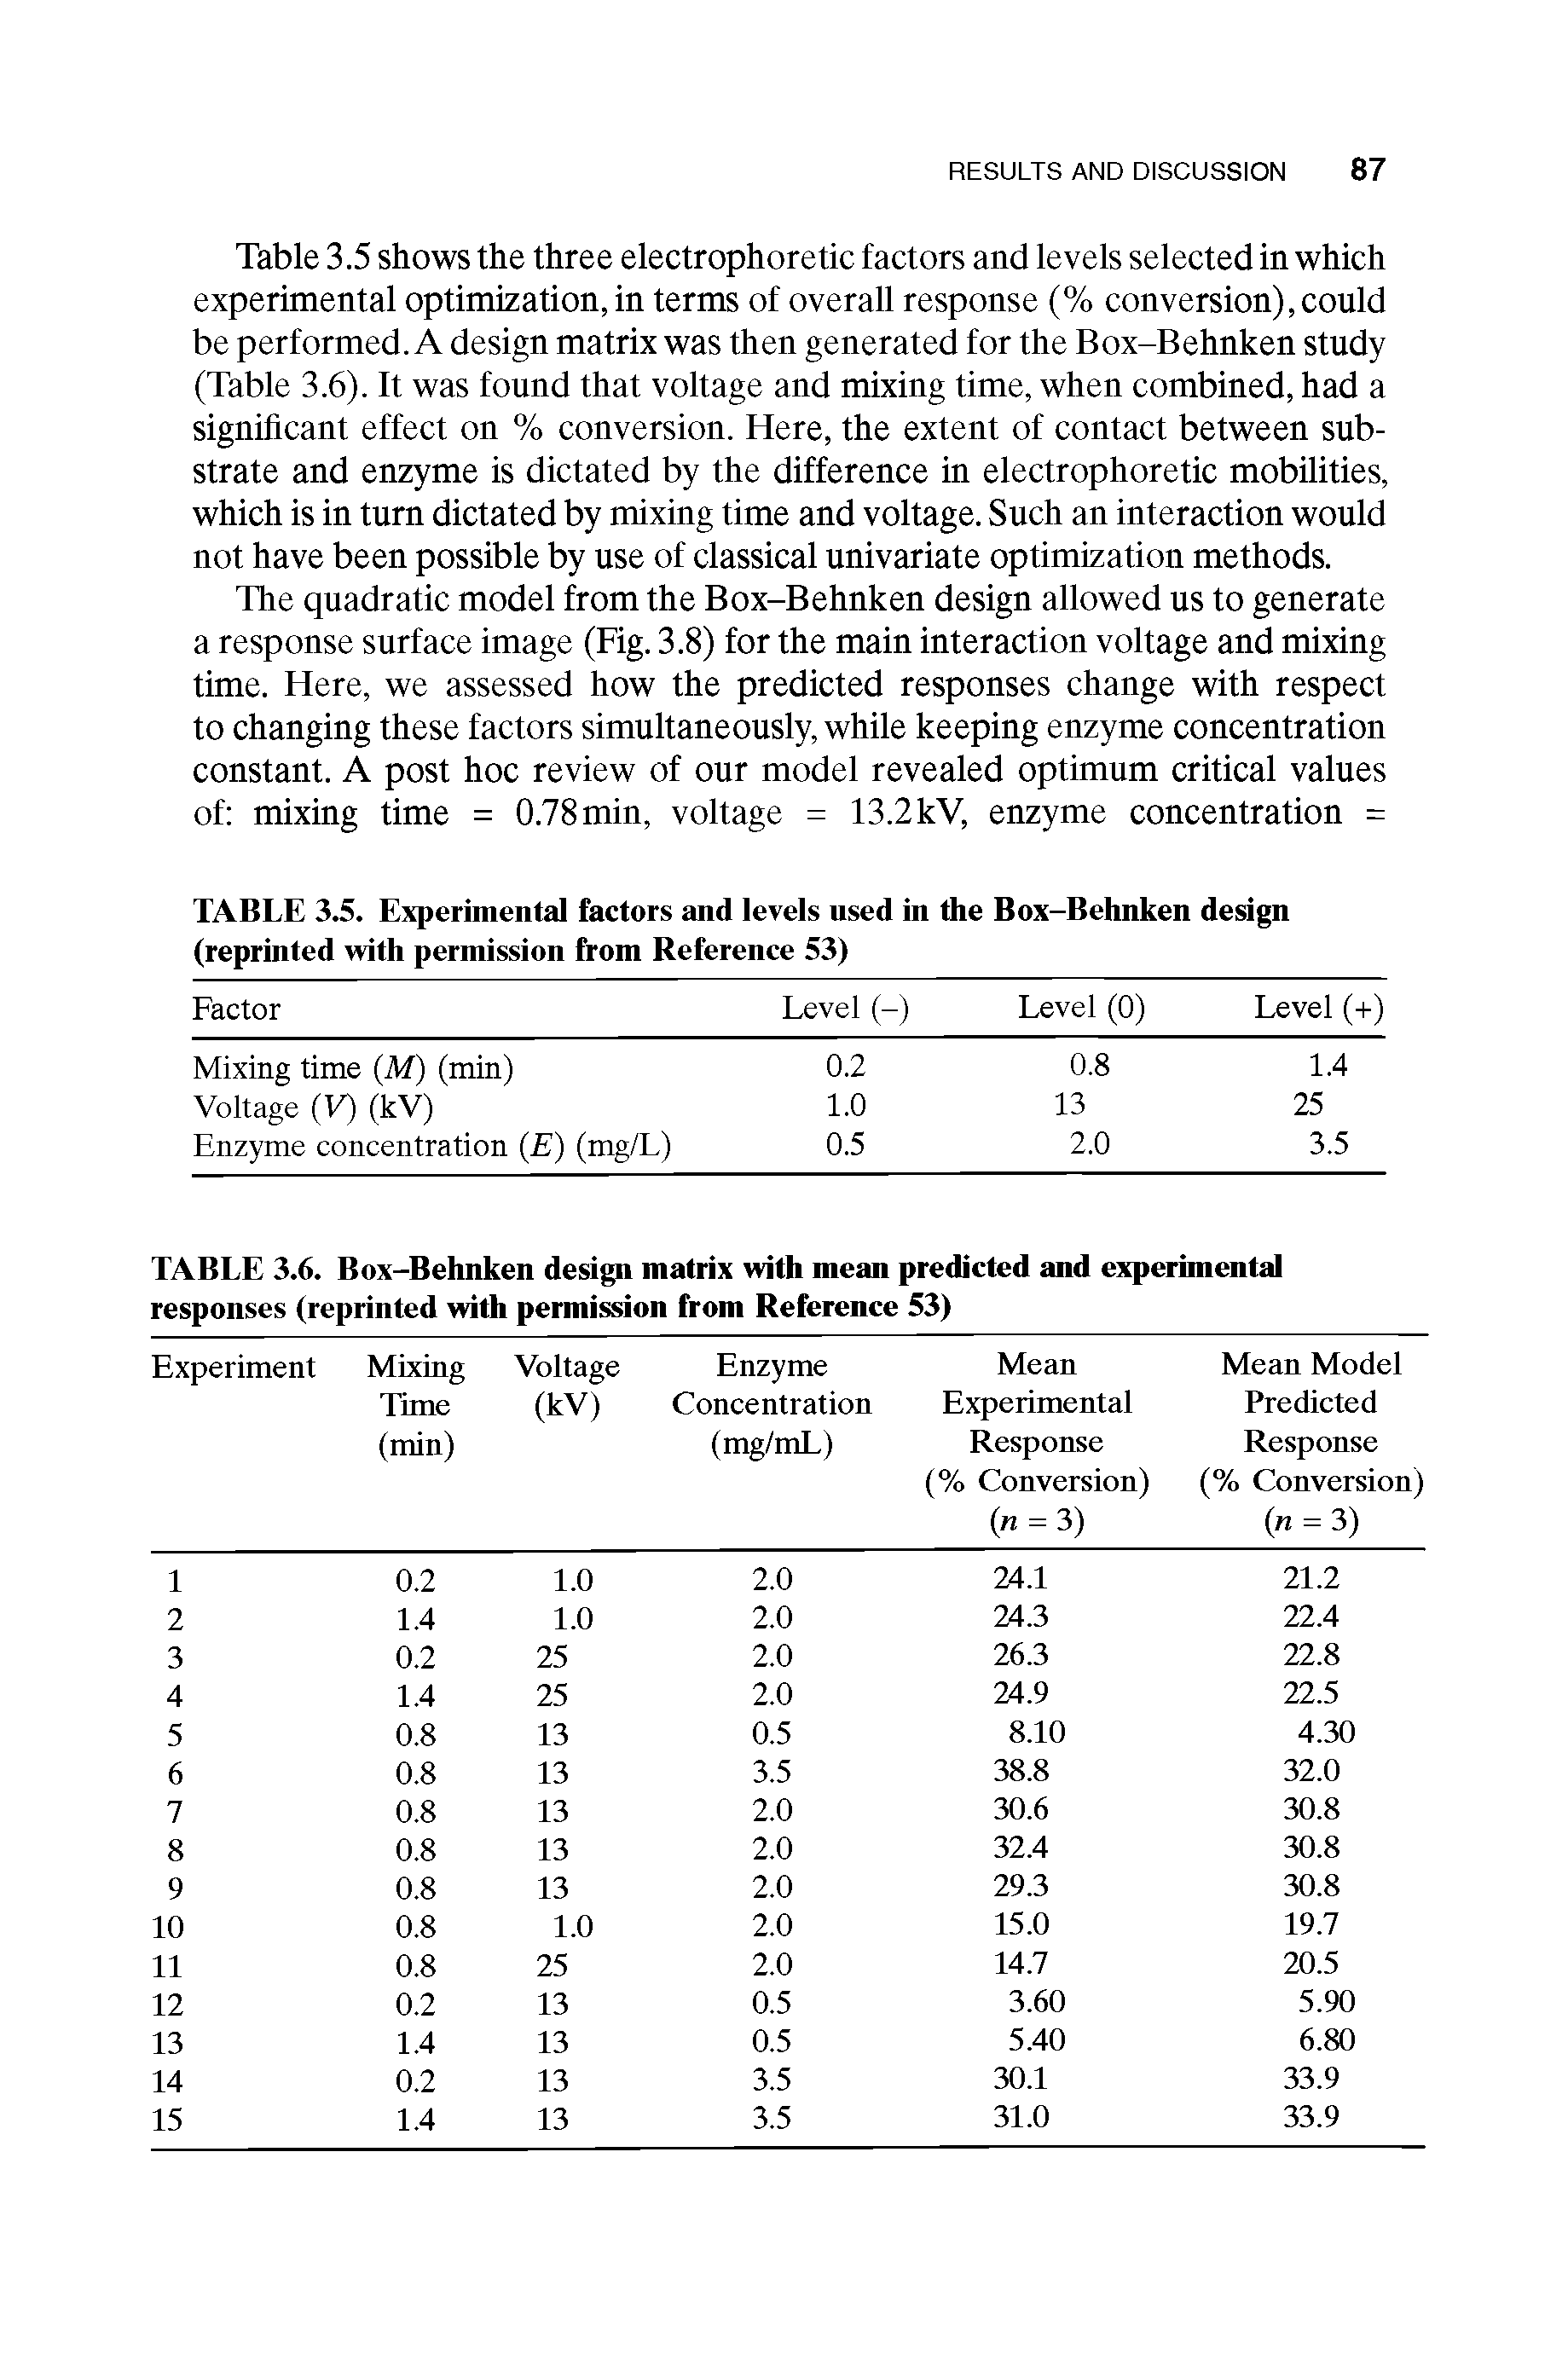 Table 3.5 shows the three electrophoretic factors and levels selected in which experimental optimization, in terms of overall response (% conversion), could be performed. A design matrix was then generated for the Box-Behnken study (Table 3.6). It was found that voltage and mixing time, when combined, had a significant effect on % conversion. Here, the extent of contact between substrate and enzyme is dictated by the difference in electrophoretic mobilities, which is in turn dictated by mixing time and voltage. Such an interaction would not have been possible by use of classical univariate optimization methods.